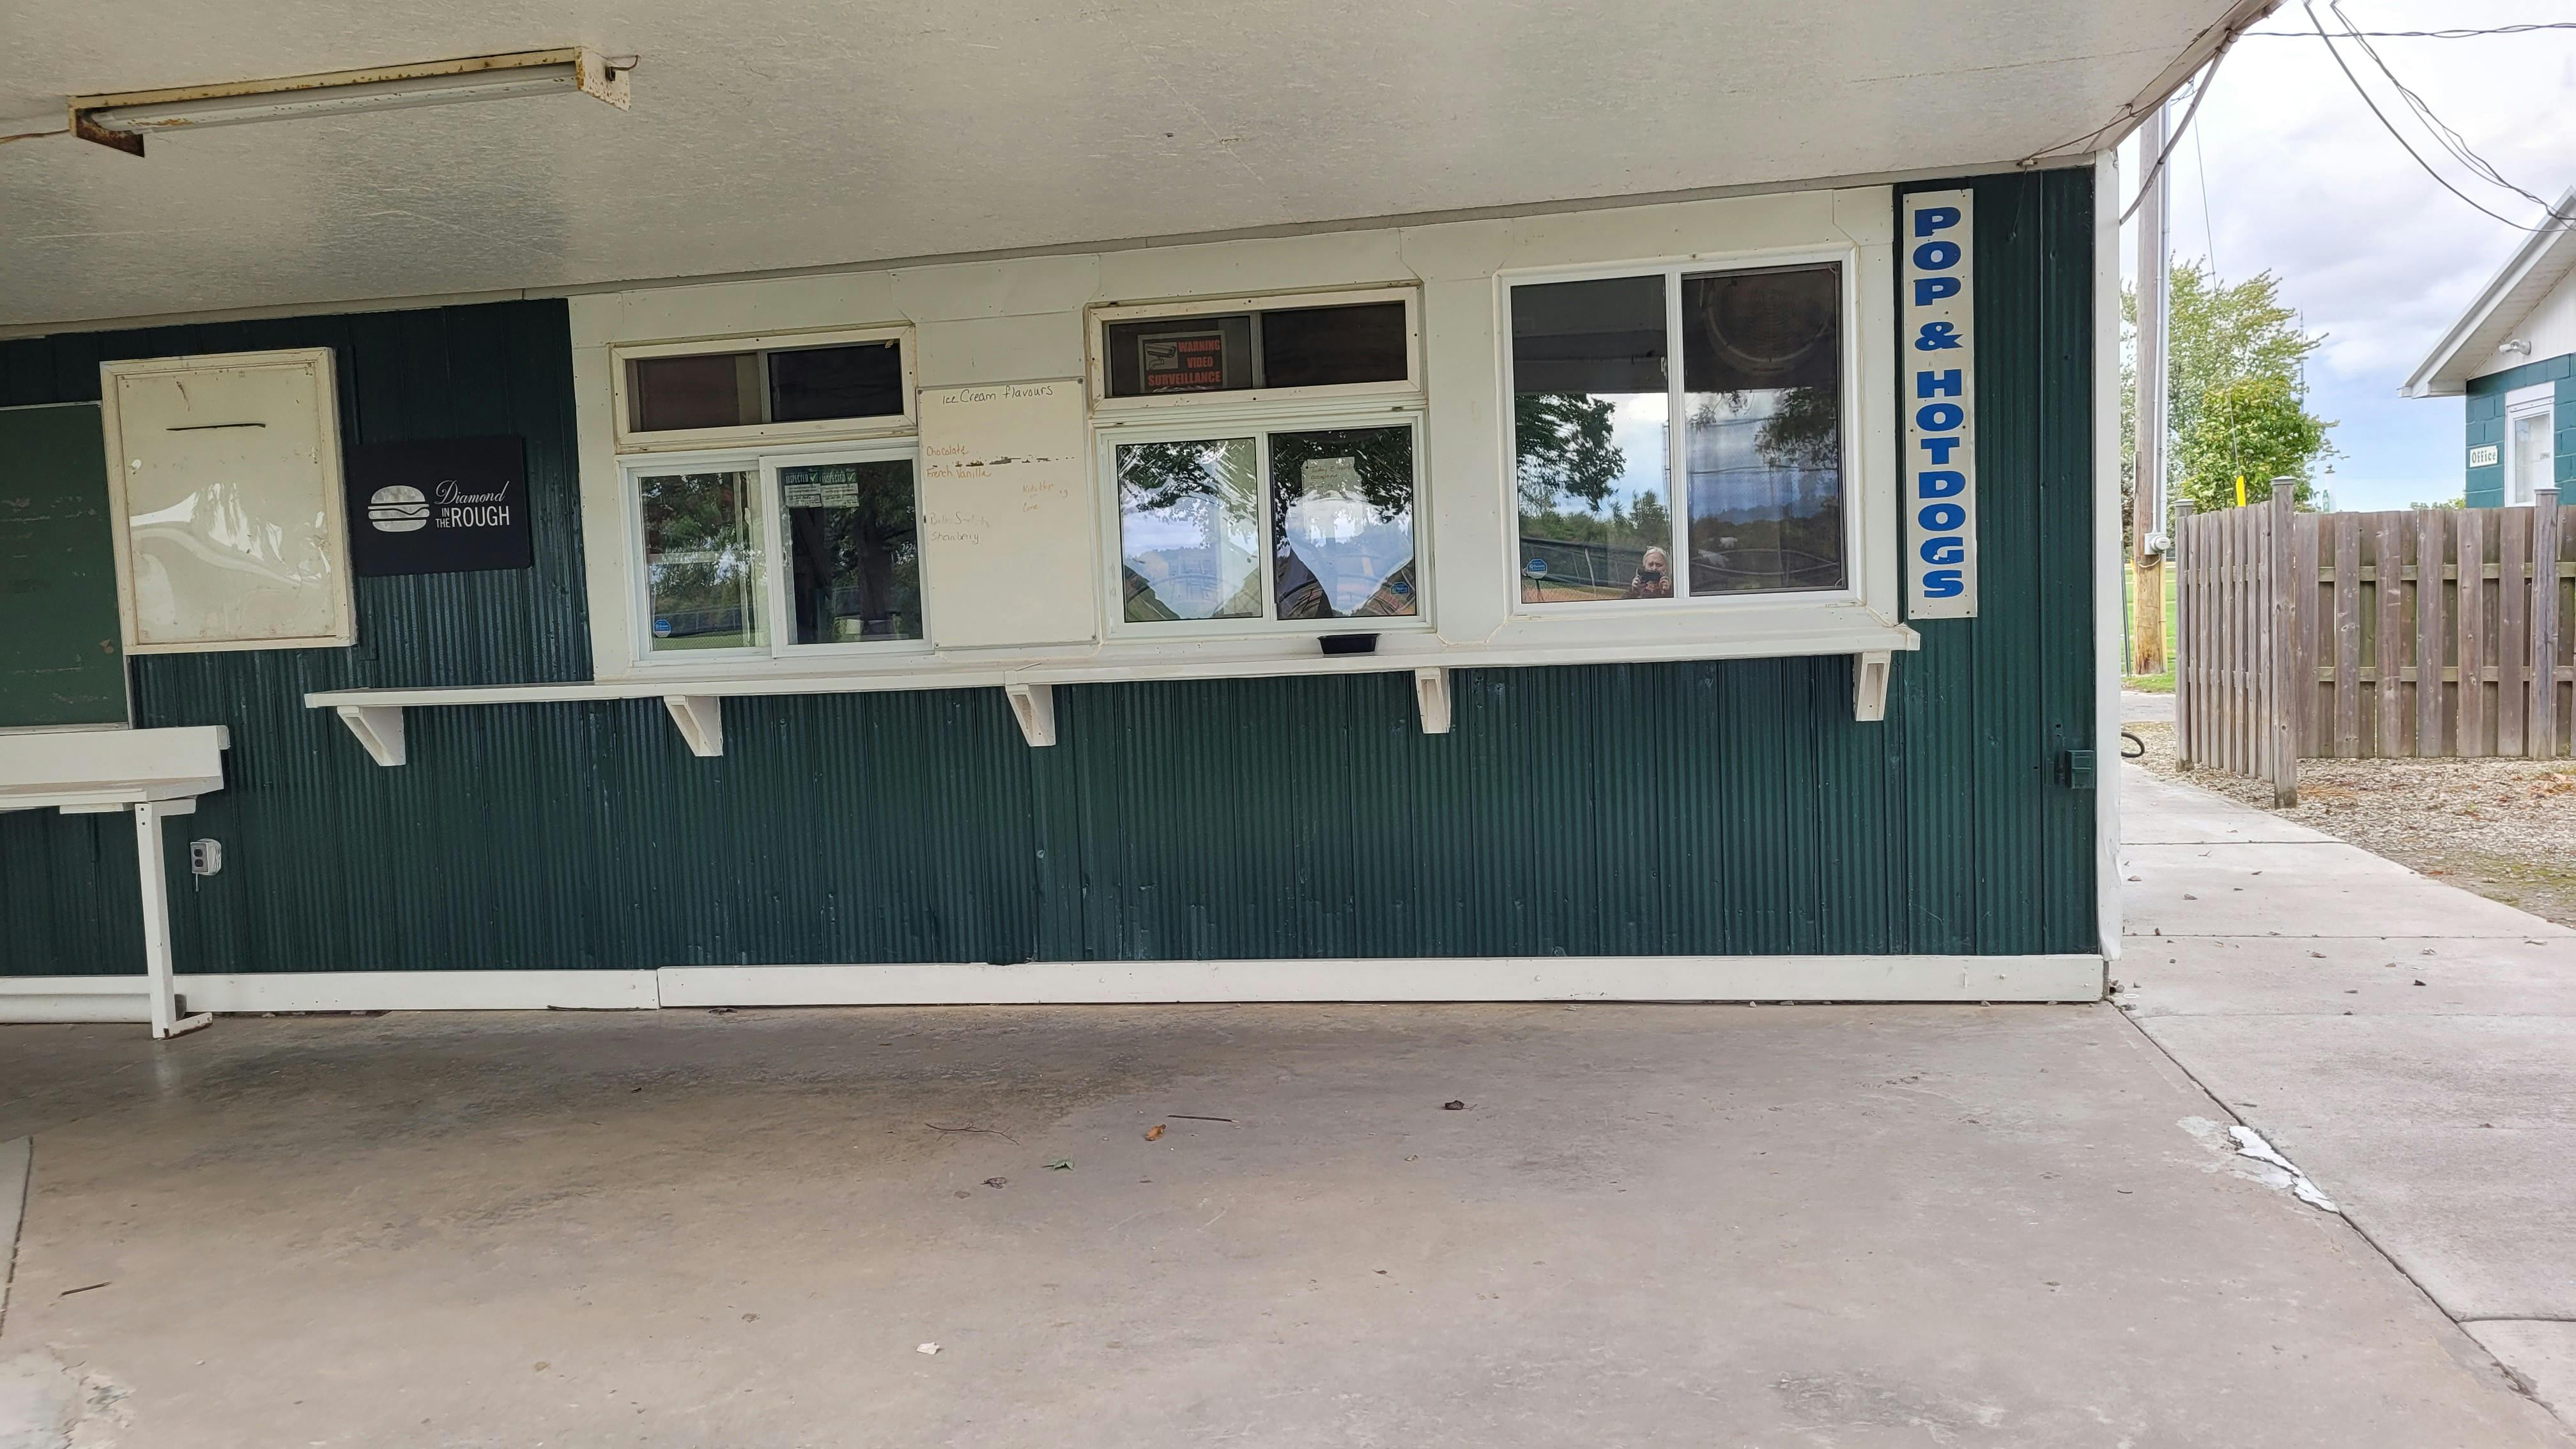 Existing concession stand